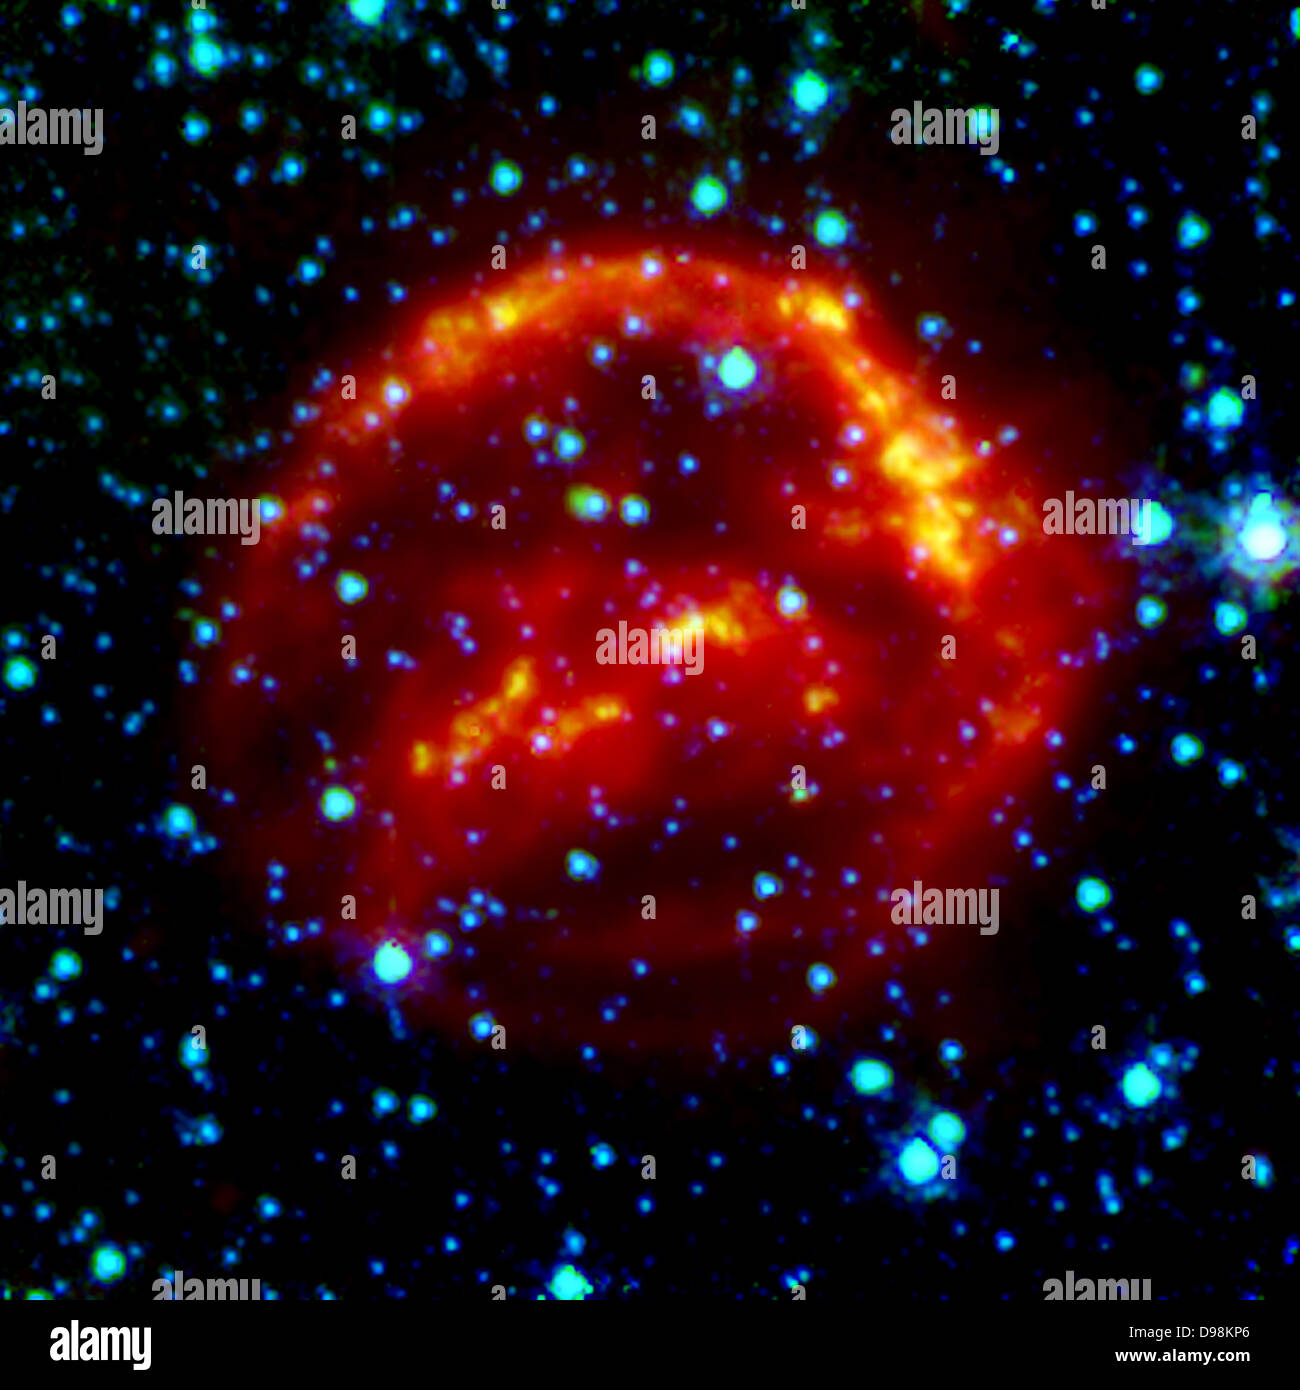 Kepler's Supernova Remnant: A View from Spitzer Space Telescope. This Spitzer false-colour image is a composite of data from Stock Photo